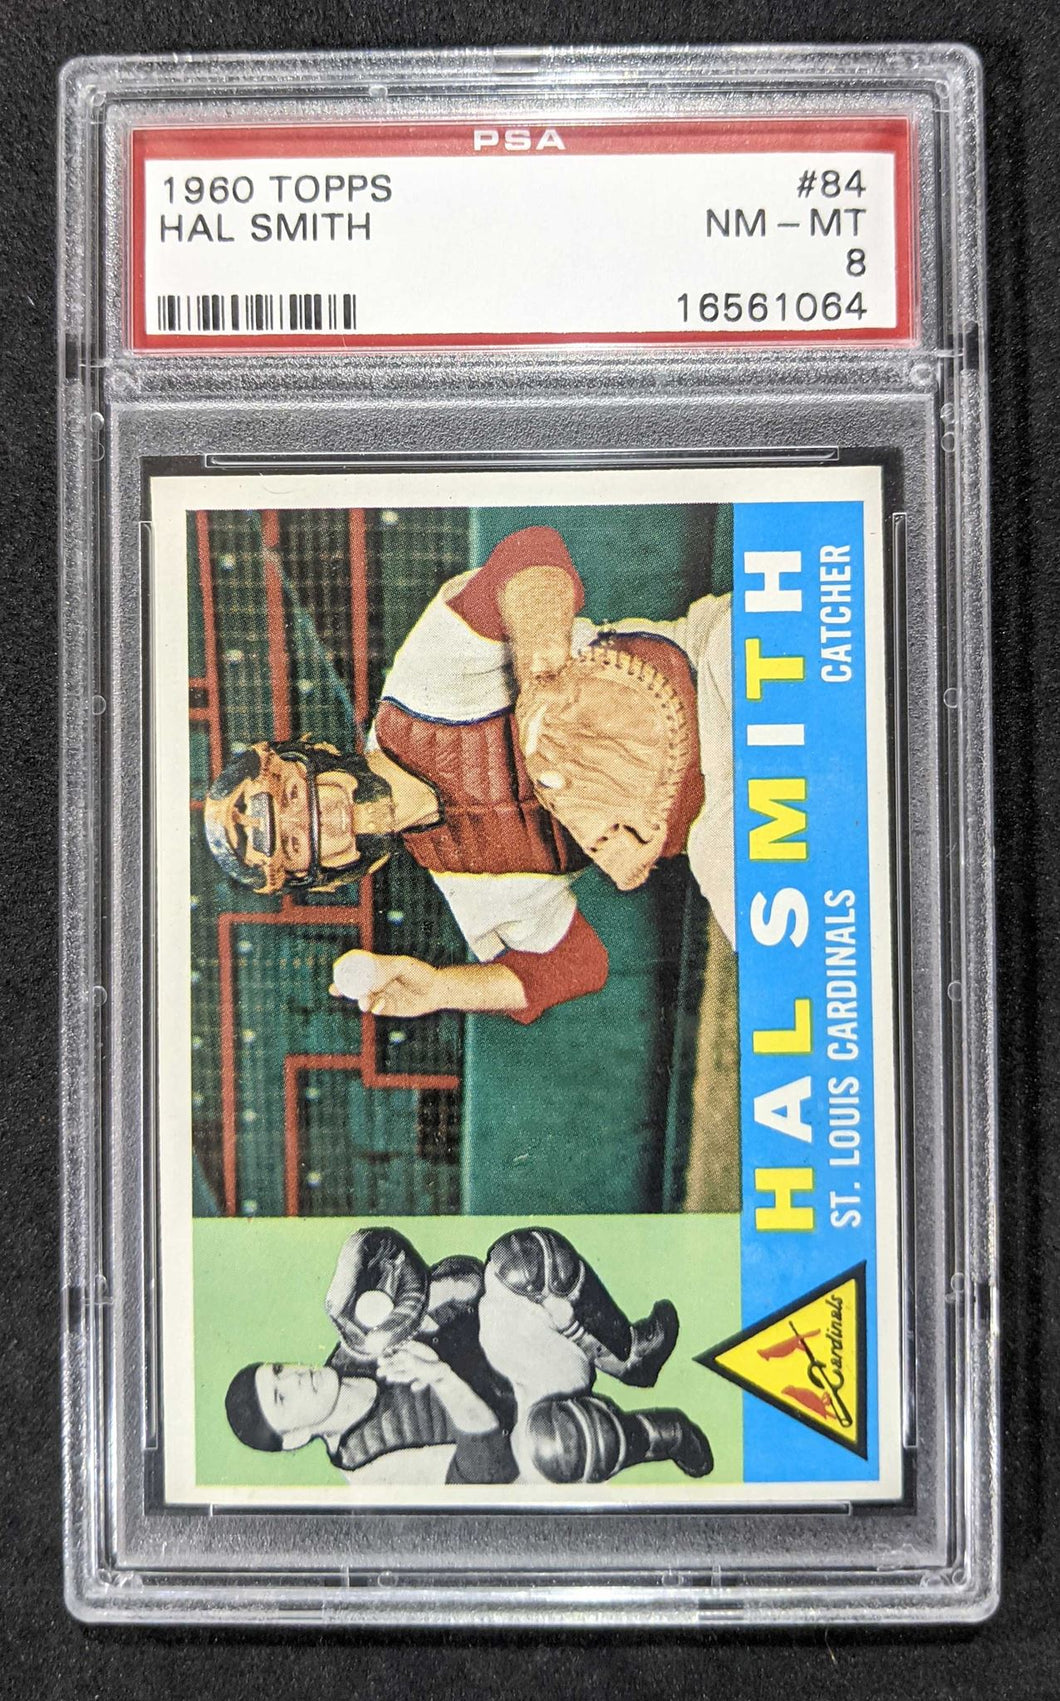 1960 Topps Hal Smith #84 PSA NM-MT 8 (Well Centered), 16561064